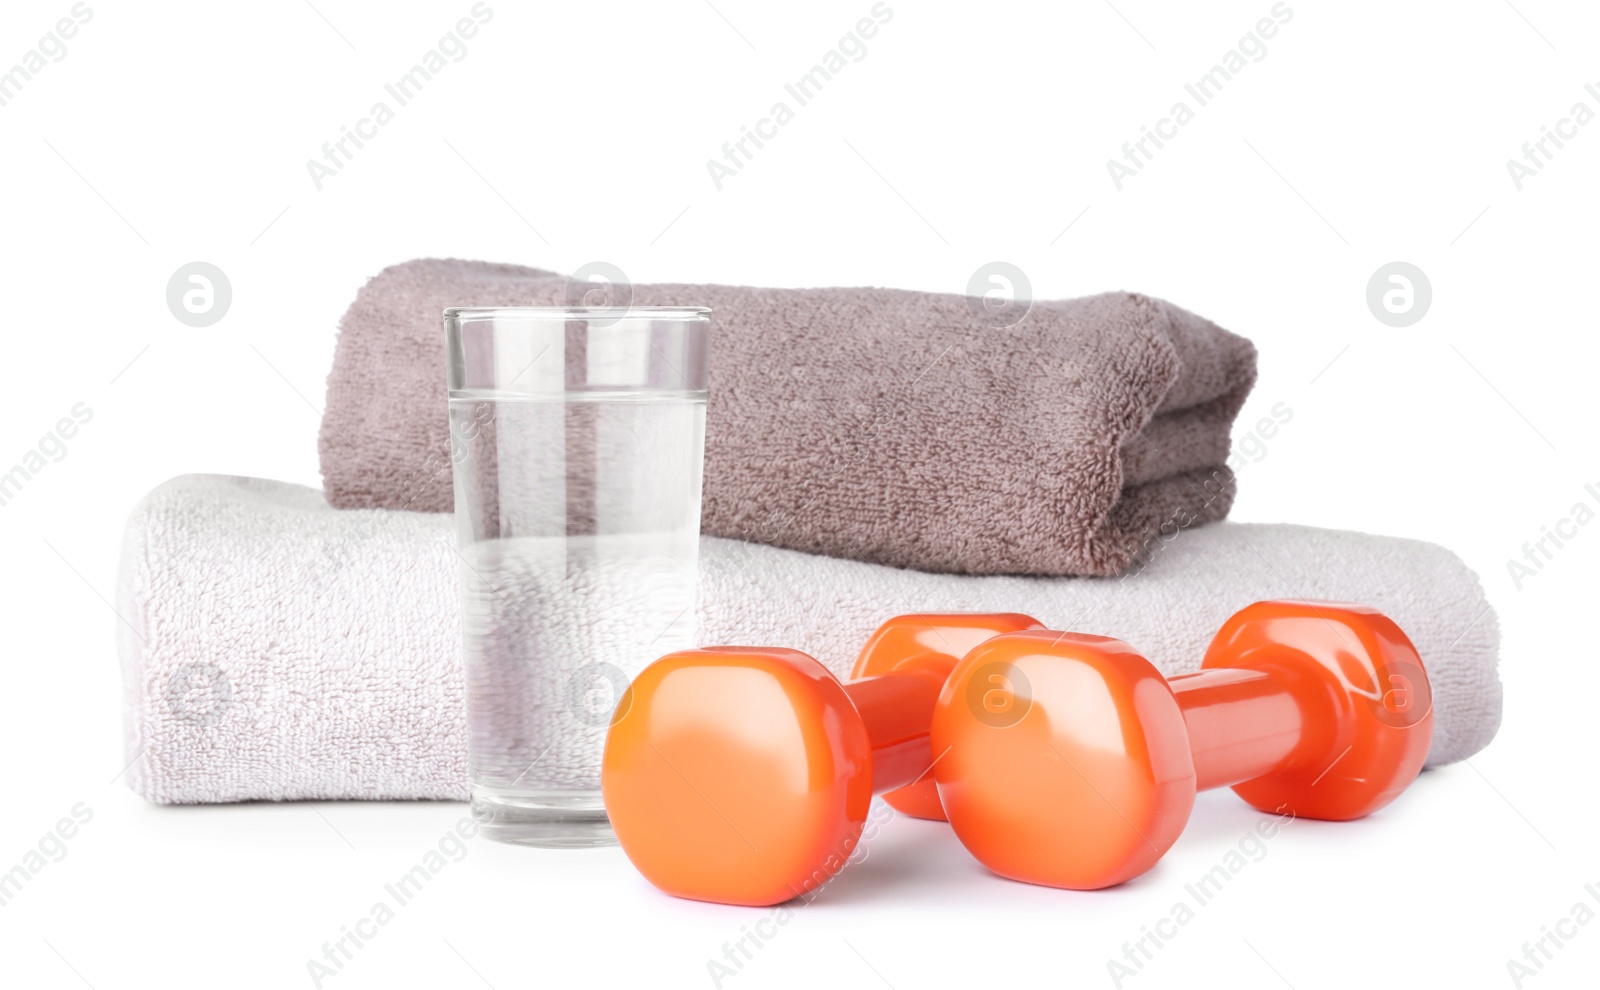 Photo of Stylish dumbbells, glass of water and towels on white background. Home fitness